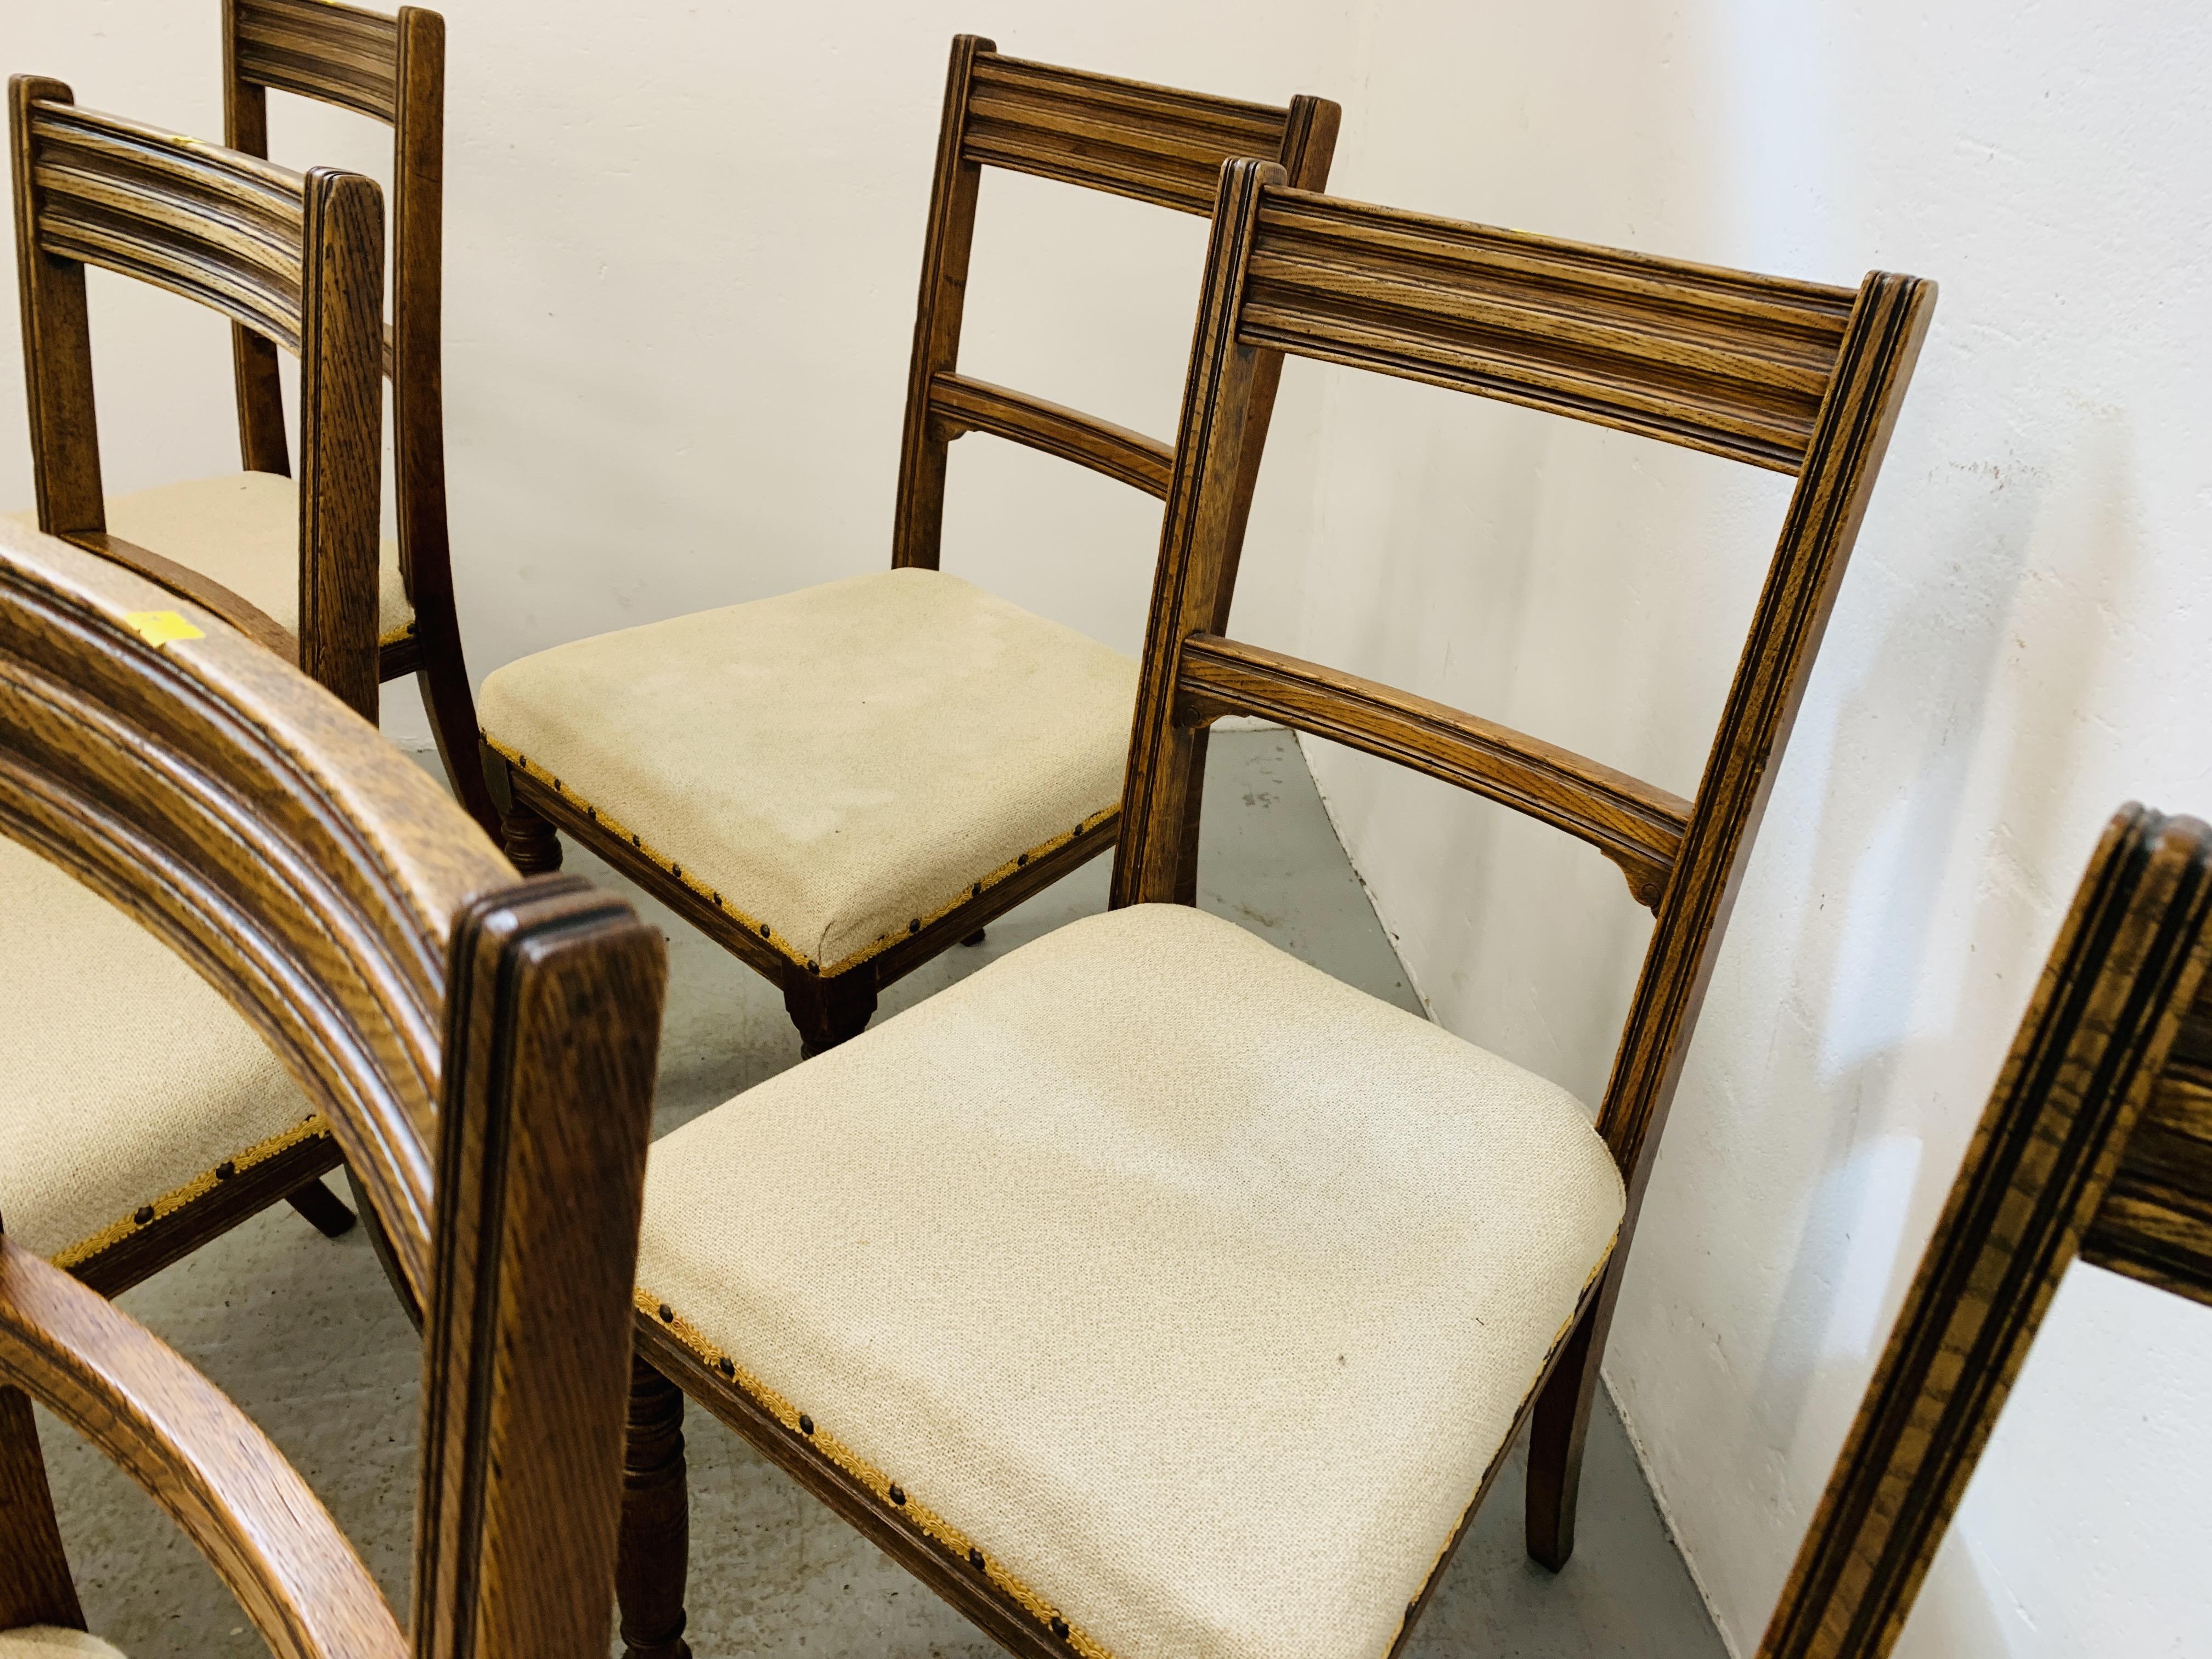 A SET OF 6 OAK FRAMED EDWARDIAN DINING CHAIRS ALONG WITH A SOLID OAK GATELEG DINING TABLE - Image 10 of 20